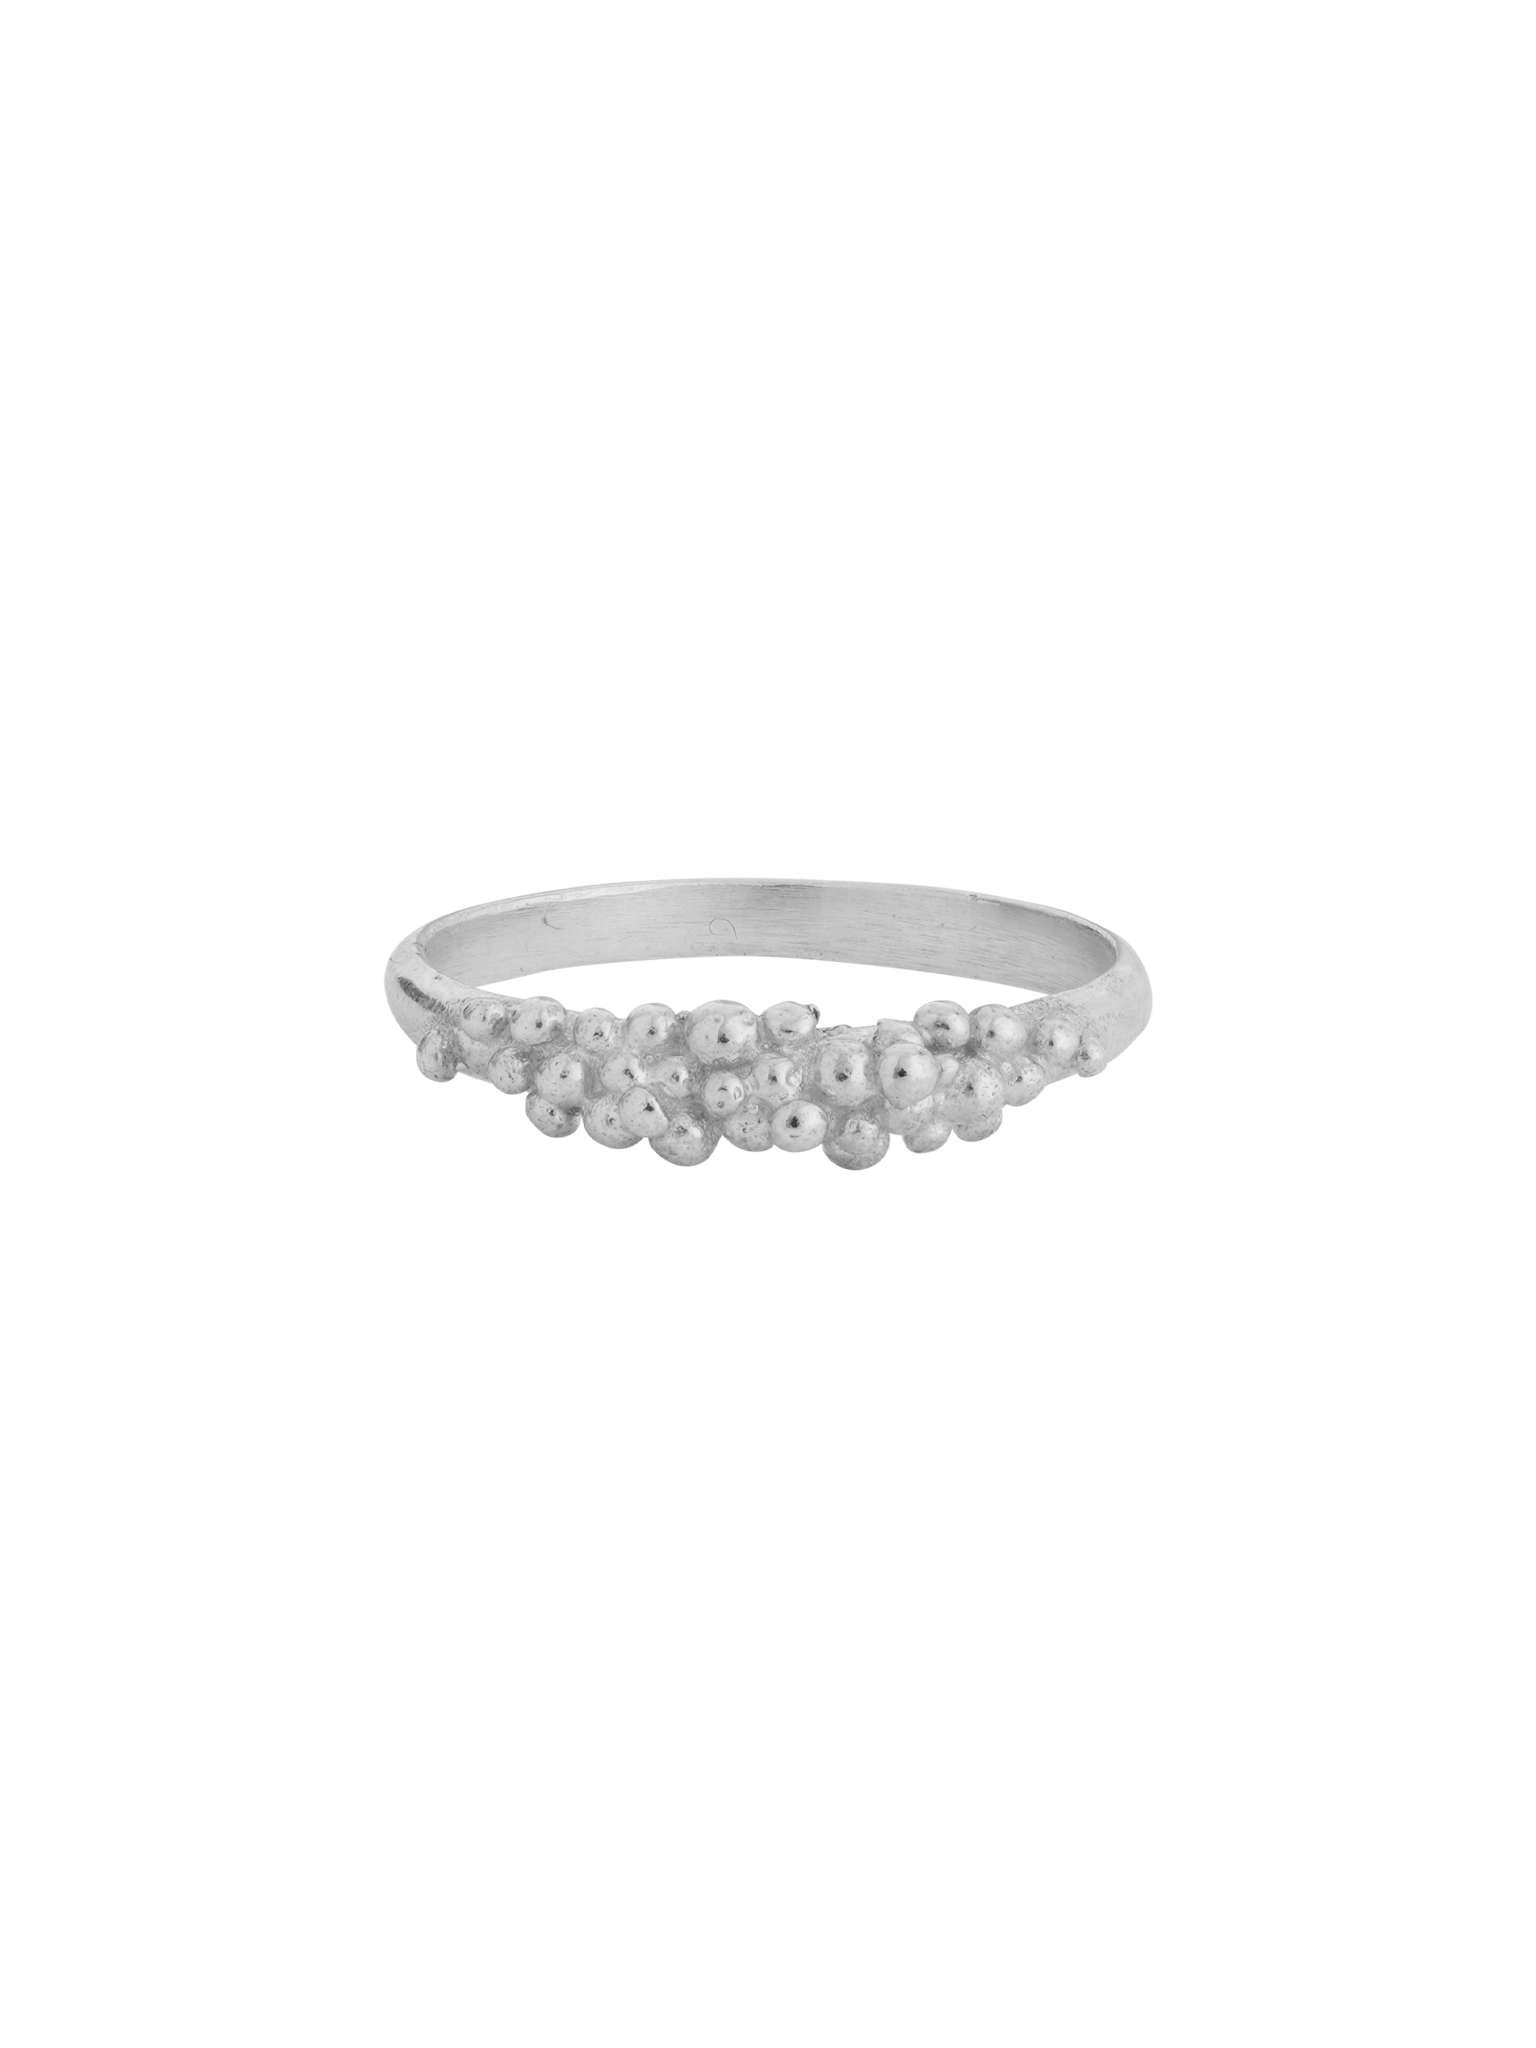 The Cremilde Bispo Jewellery Essential Dot Ring is a silver ring adorned with a cluster of silver granules.